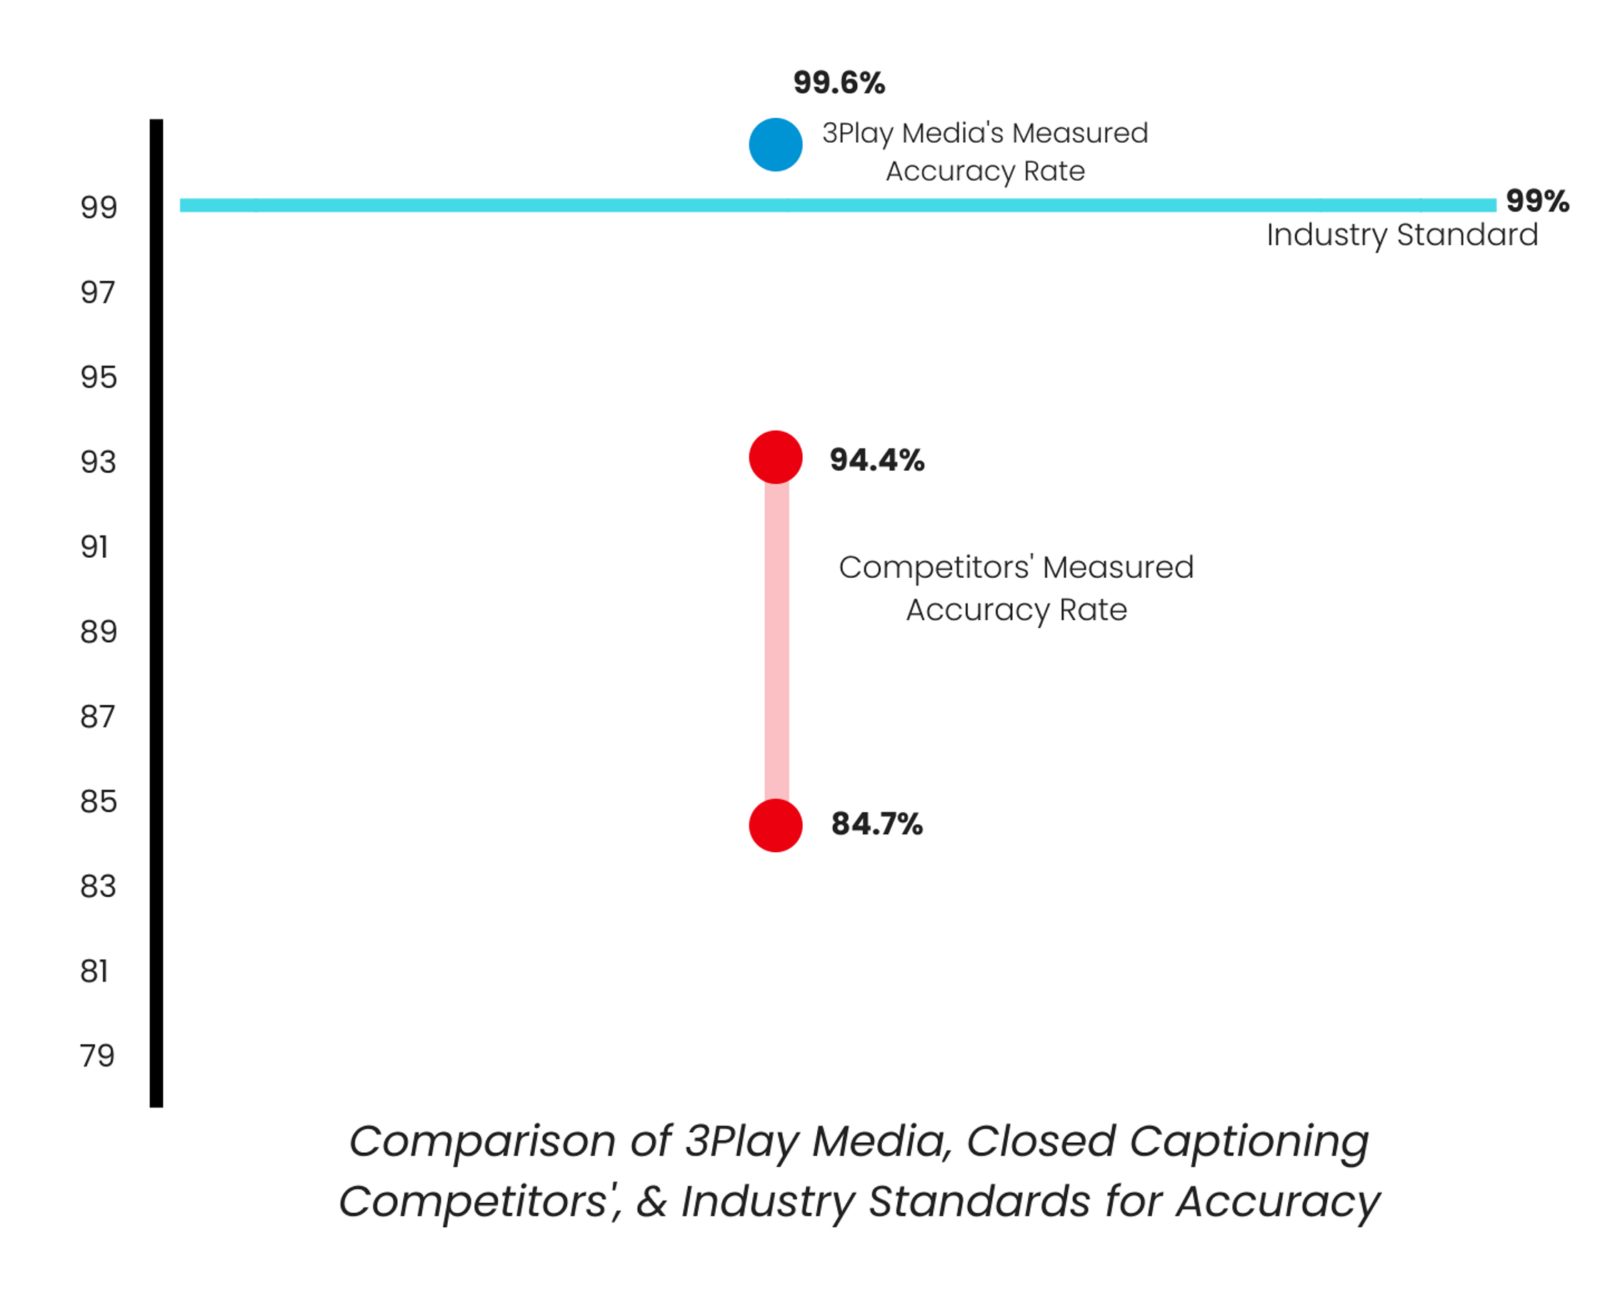 graph demonstrating accuracy rate. vendor accuracy rate ranges from 84.7% to 94.4%. industry standard is 99%, and 3Play Media measured accuracy rate is 99.6%"